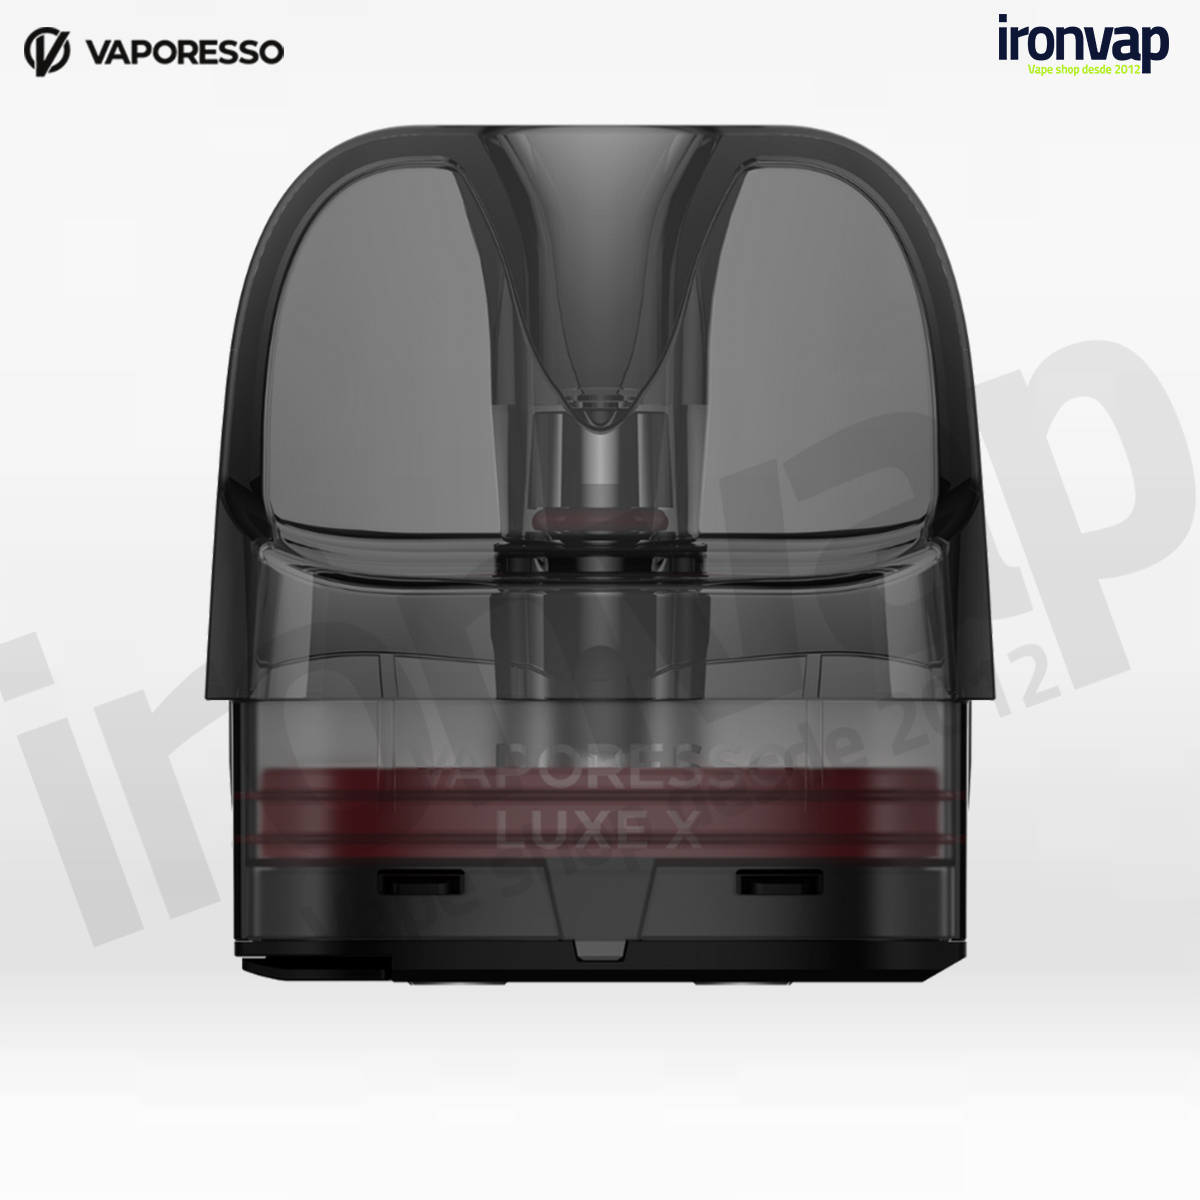 Pod%20Luxe%20X%2004ohms%20-%20VAPORESSO.png